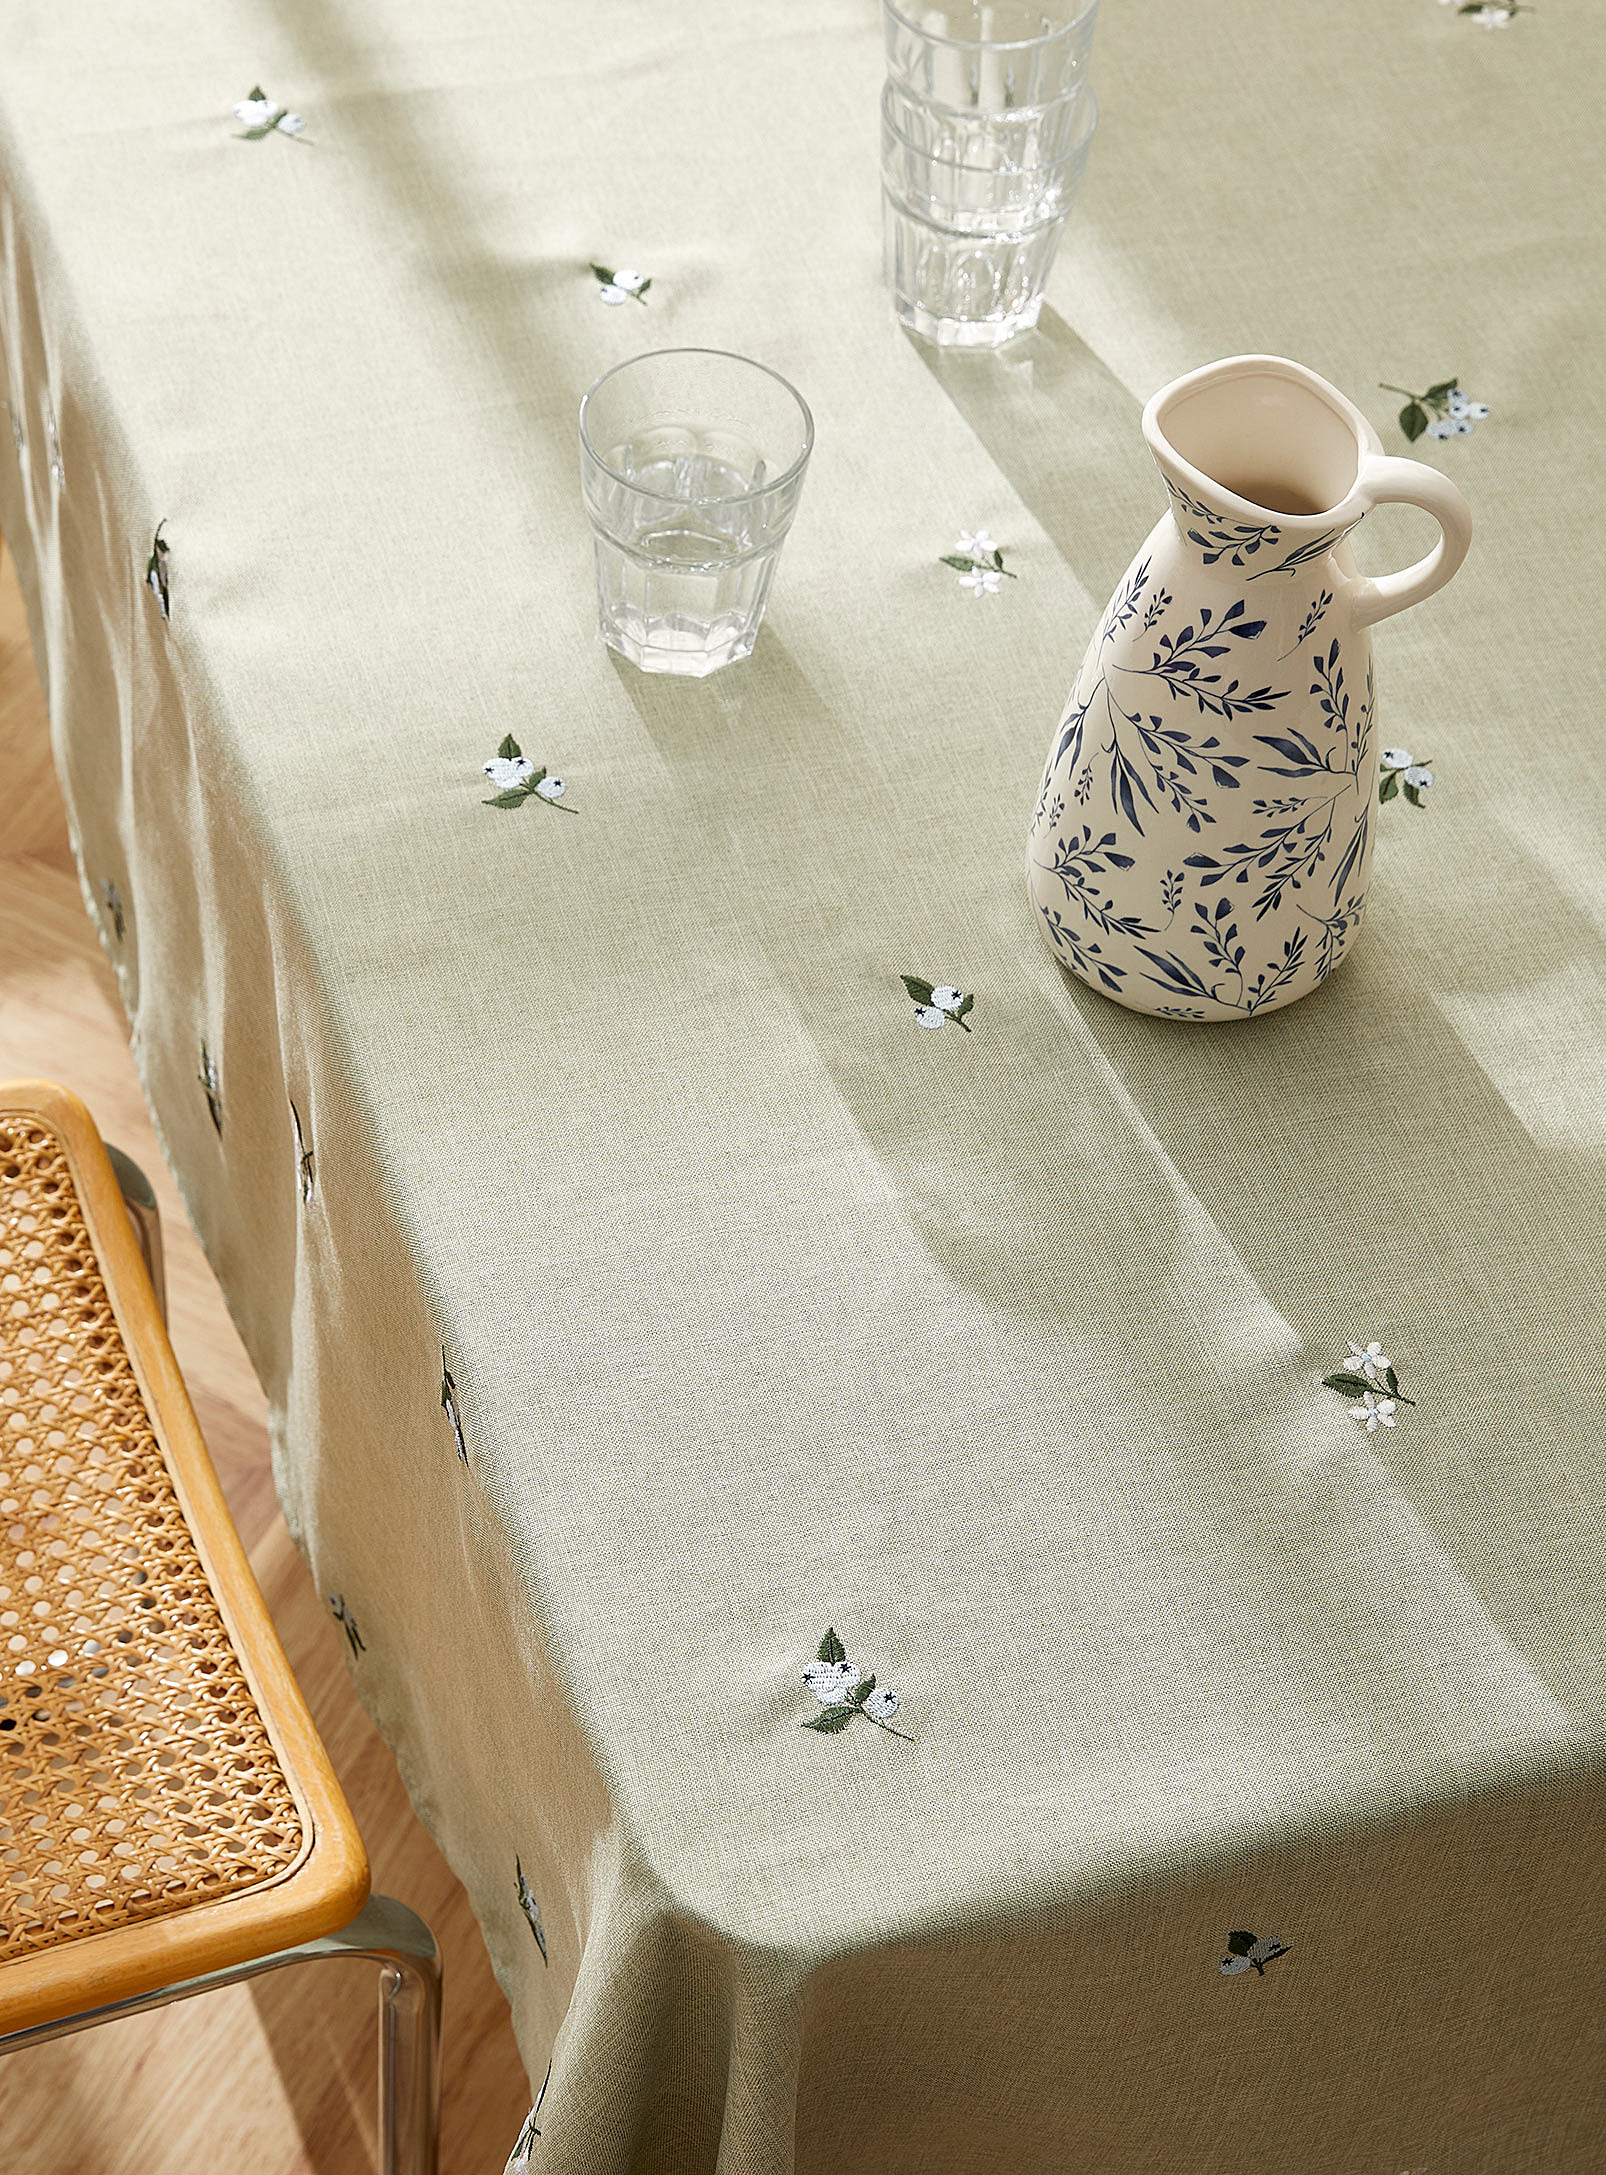 Simons Maison Embroidered Blueberry Tablecloth In Patterned Green